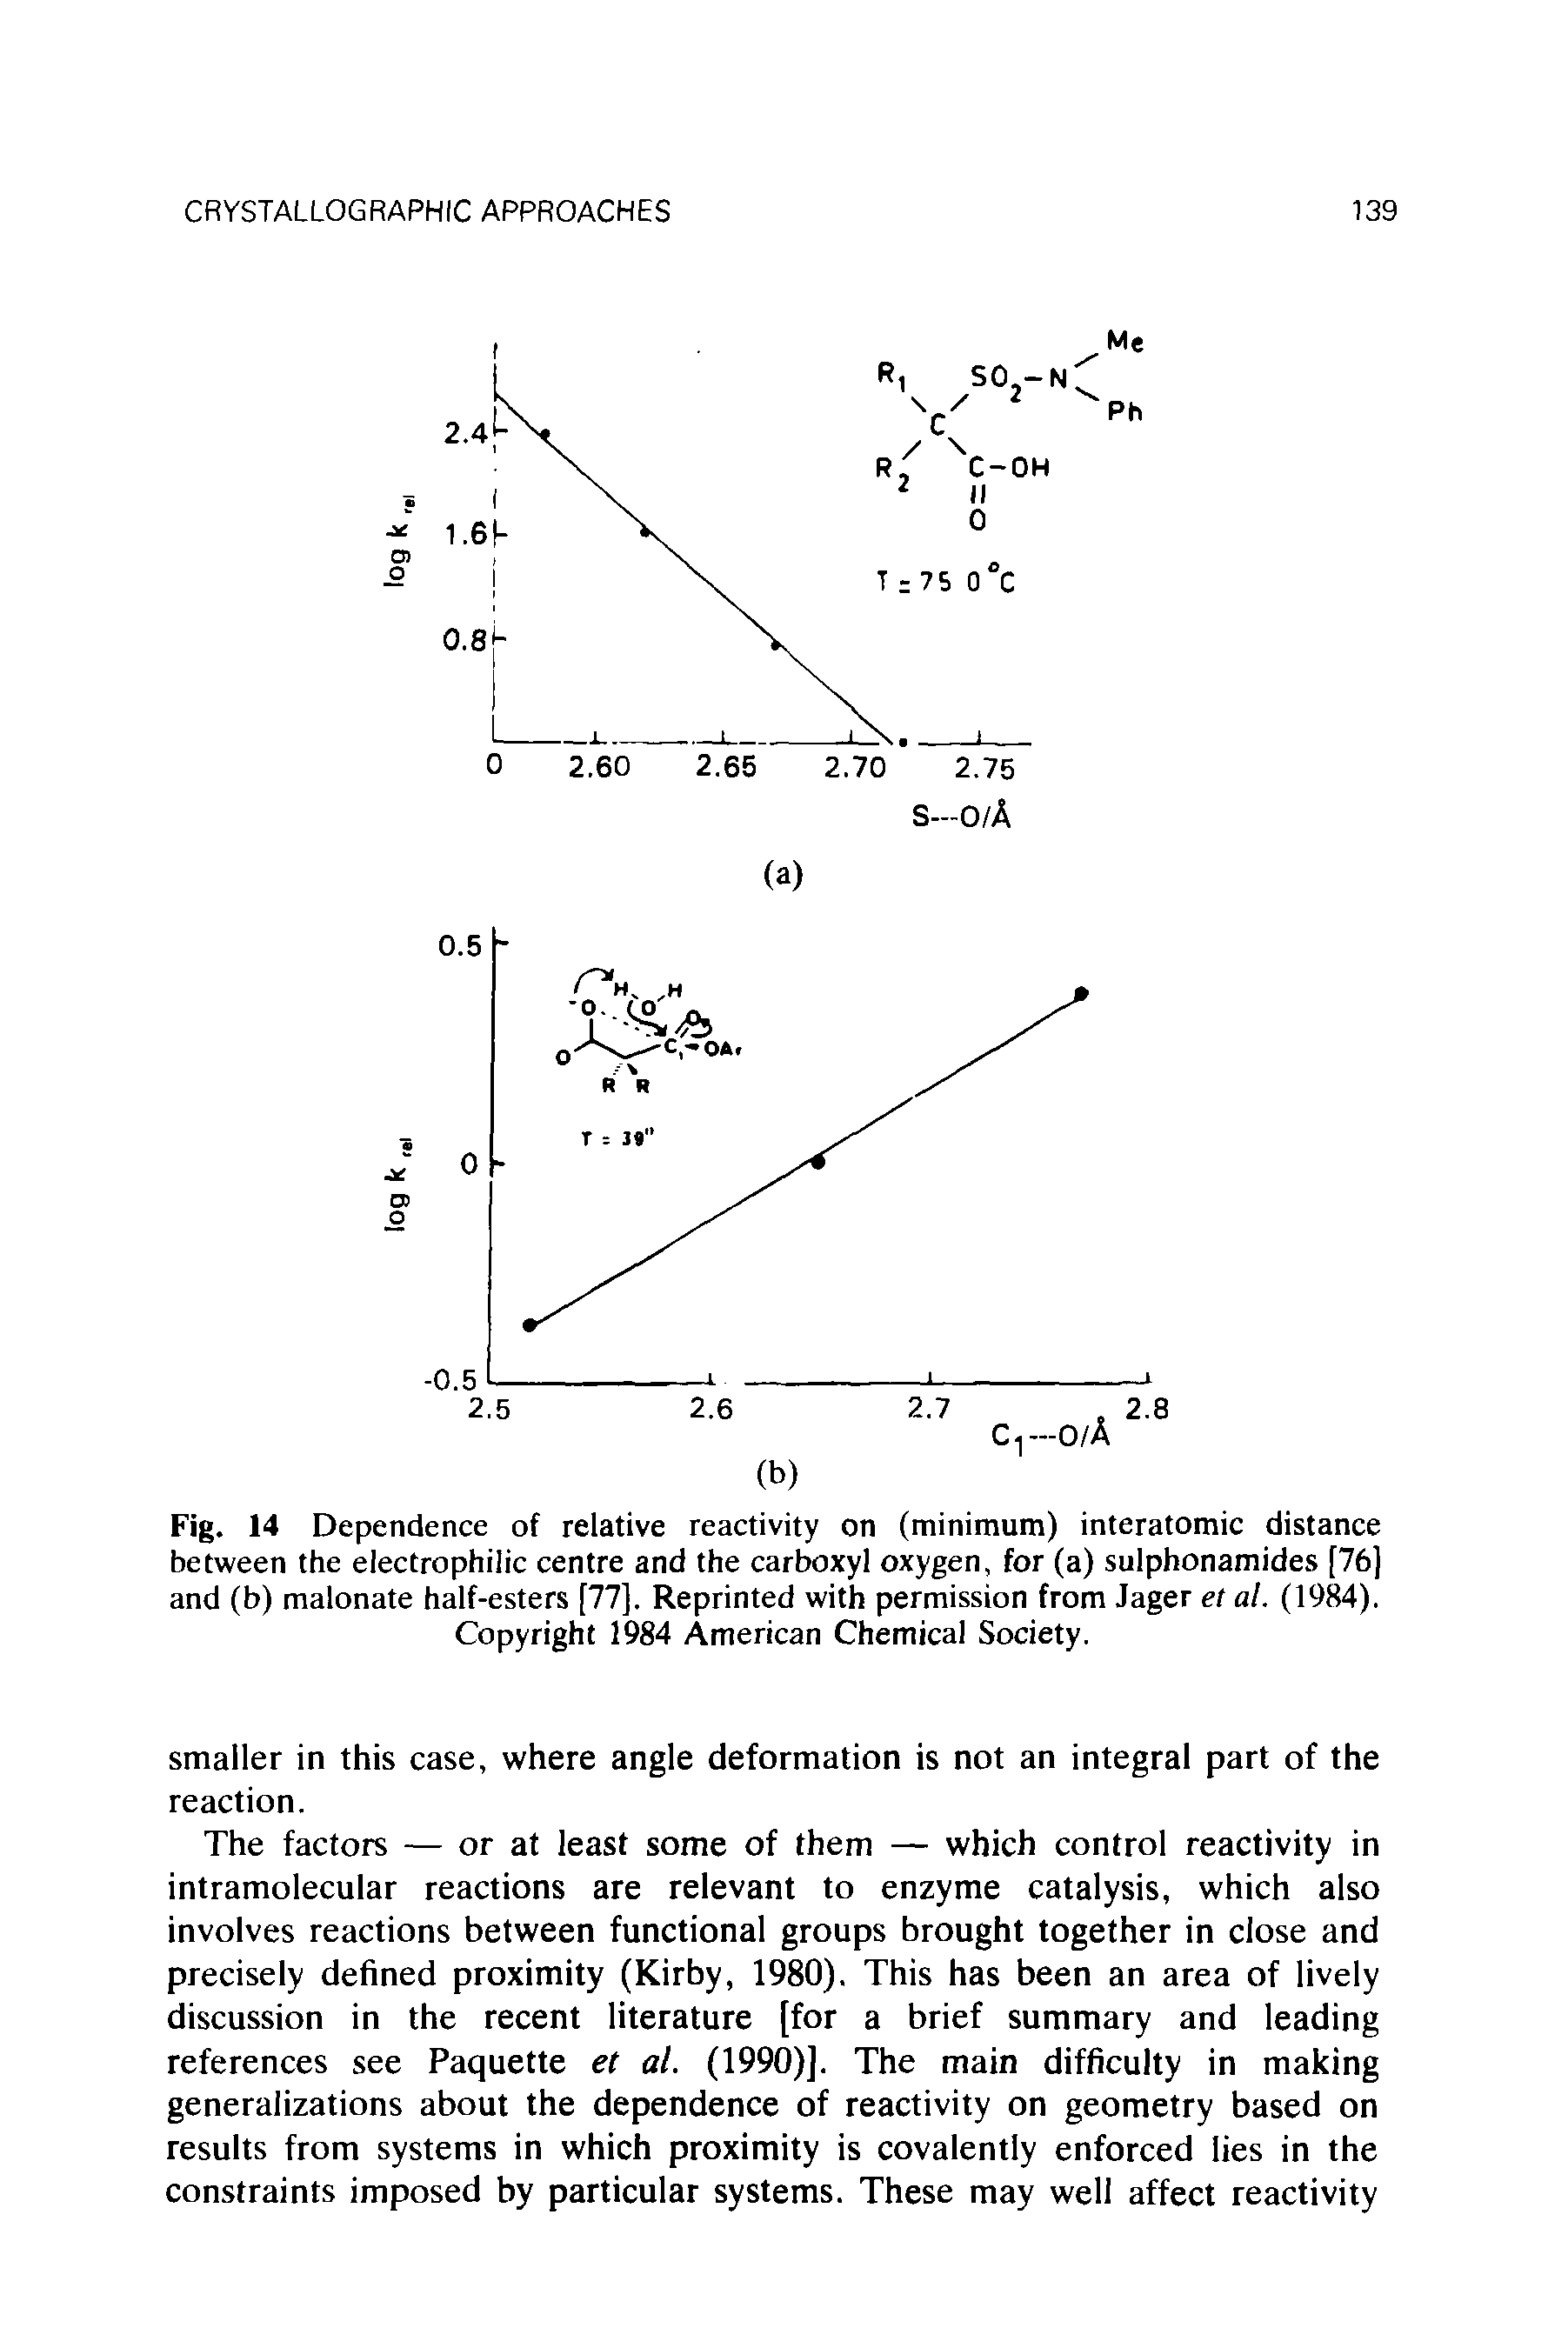 Fig. 14 Dependence of relative reactivity on (minimum) interatomic distance between the electrophilic centre and the carboxyl oxygen, for (a) sulphonamides [76] and (b) malonate half-esters [77]. Reprinted with permission from Jager et al. (1984). Copyright 1984 American Chemical Society.